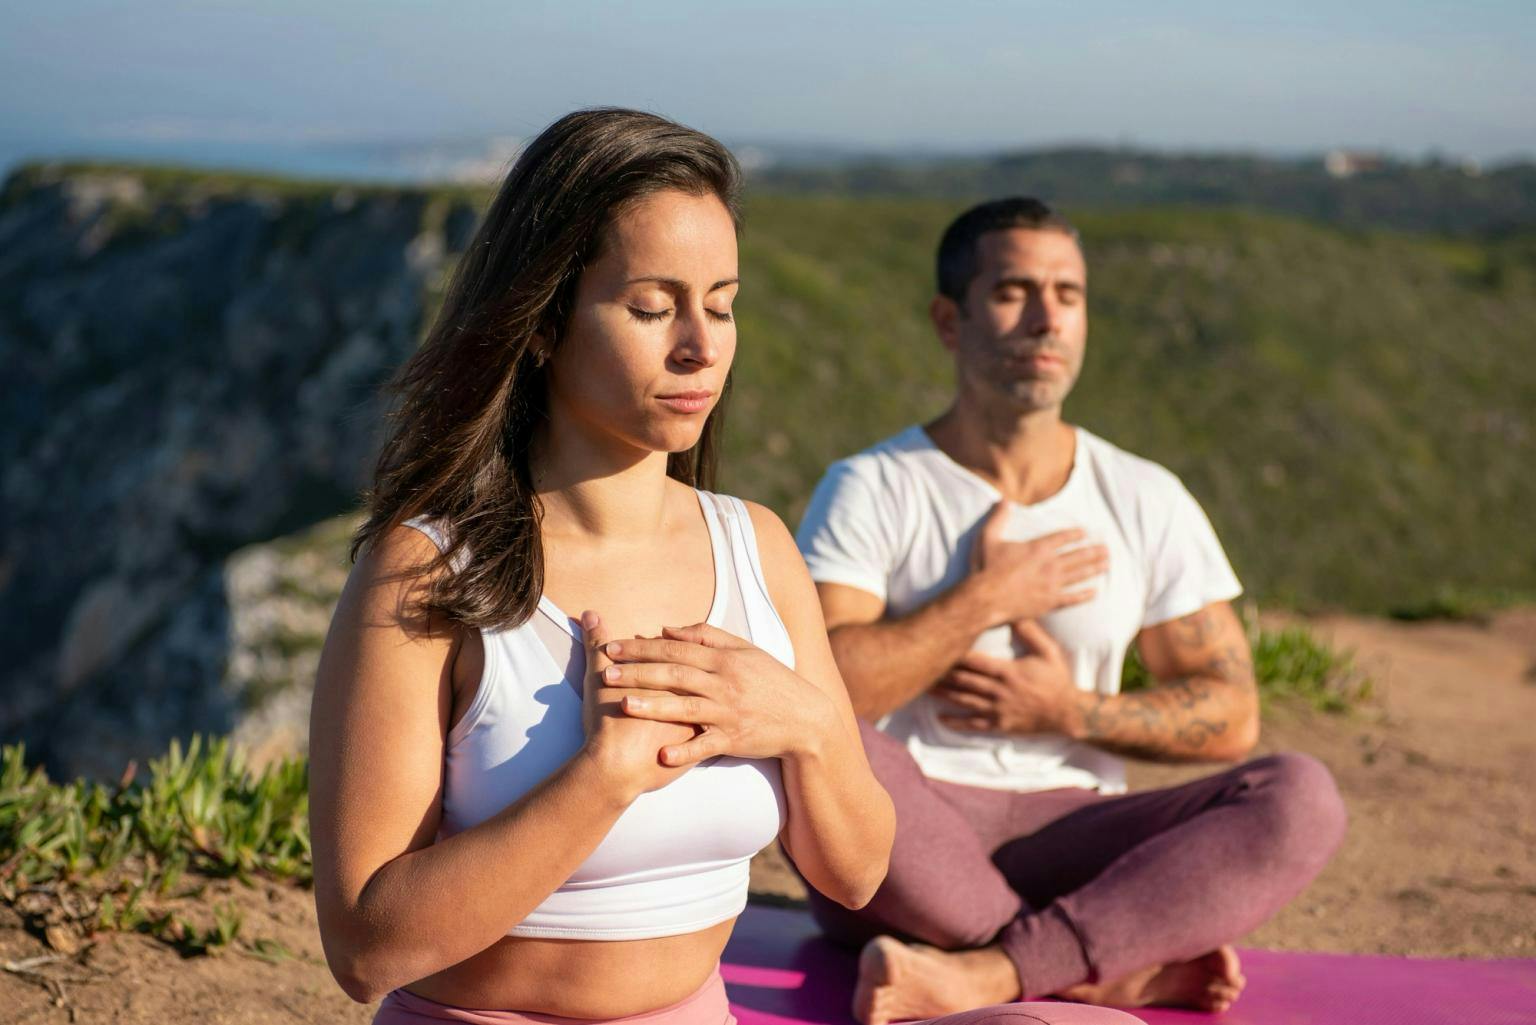 Man and woman sit cross legged on yoga matts with hands on their hearts in a meditative fashion.